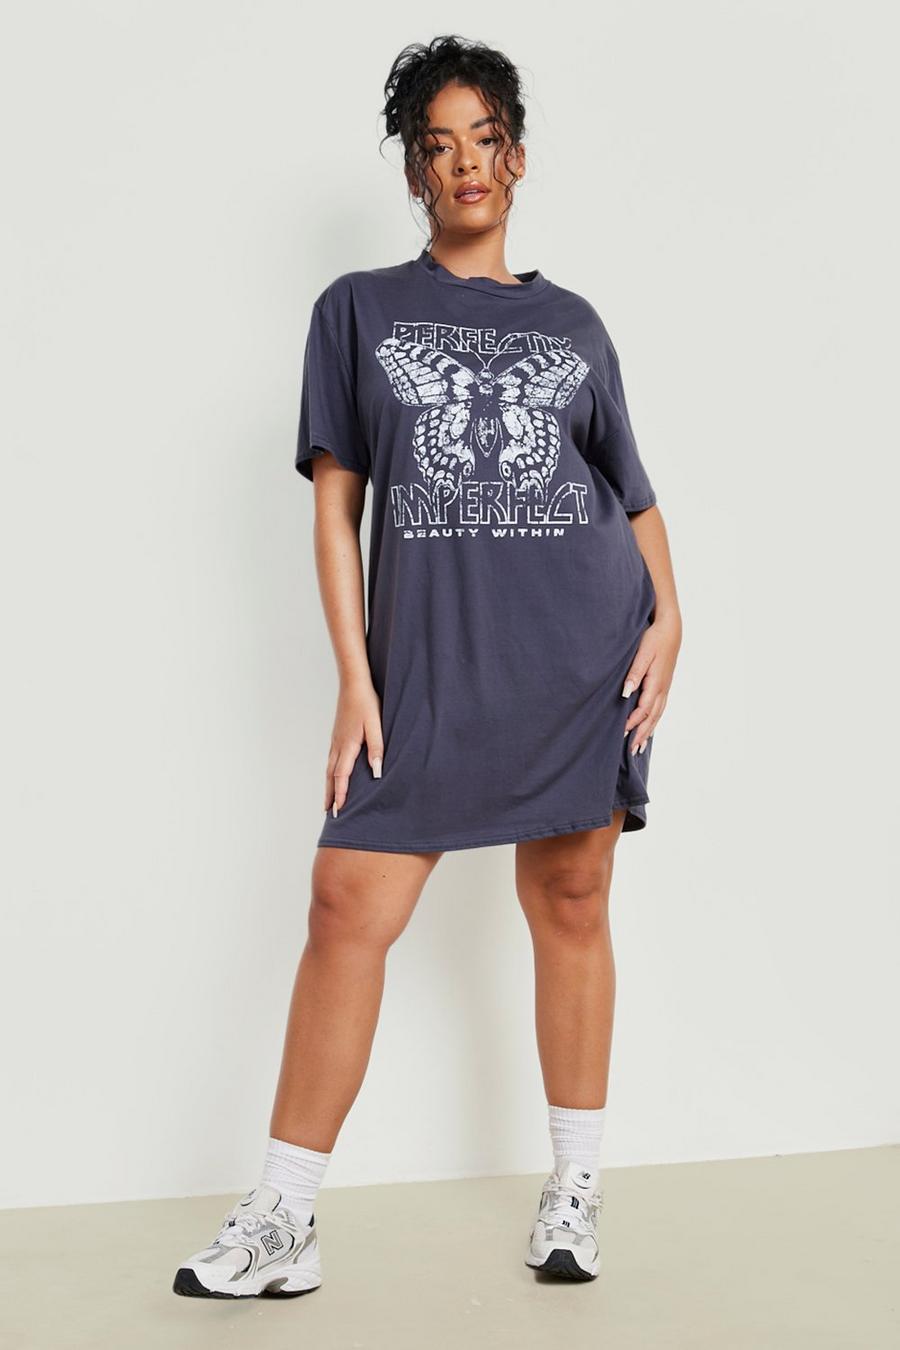 Vestito T-shirt Plus Size con slogan Perfectly Imperfect, Charcoal grigio image number 1